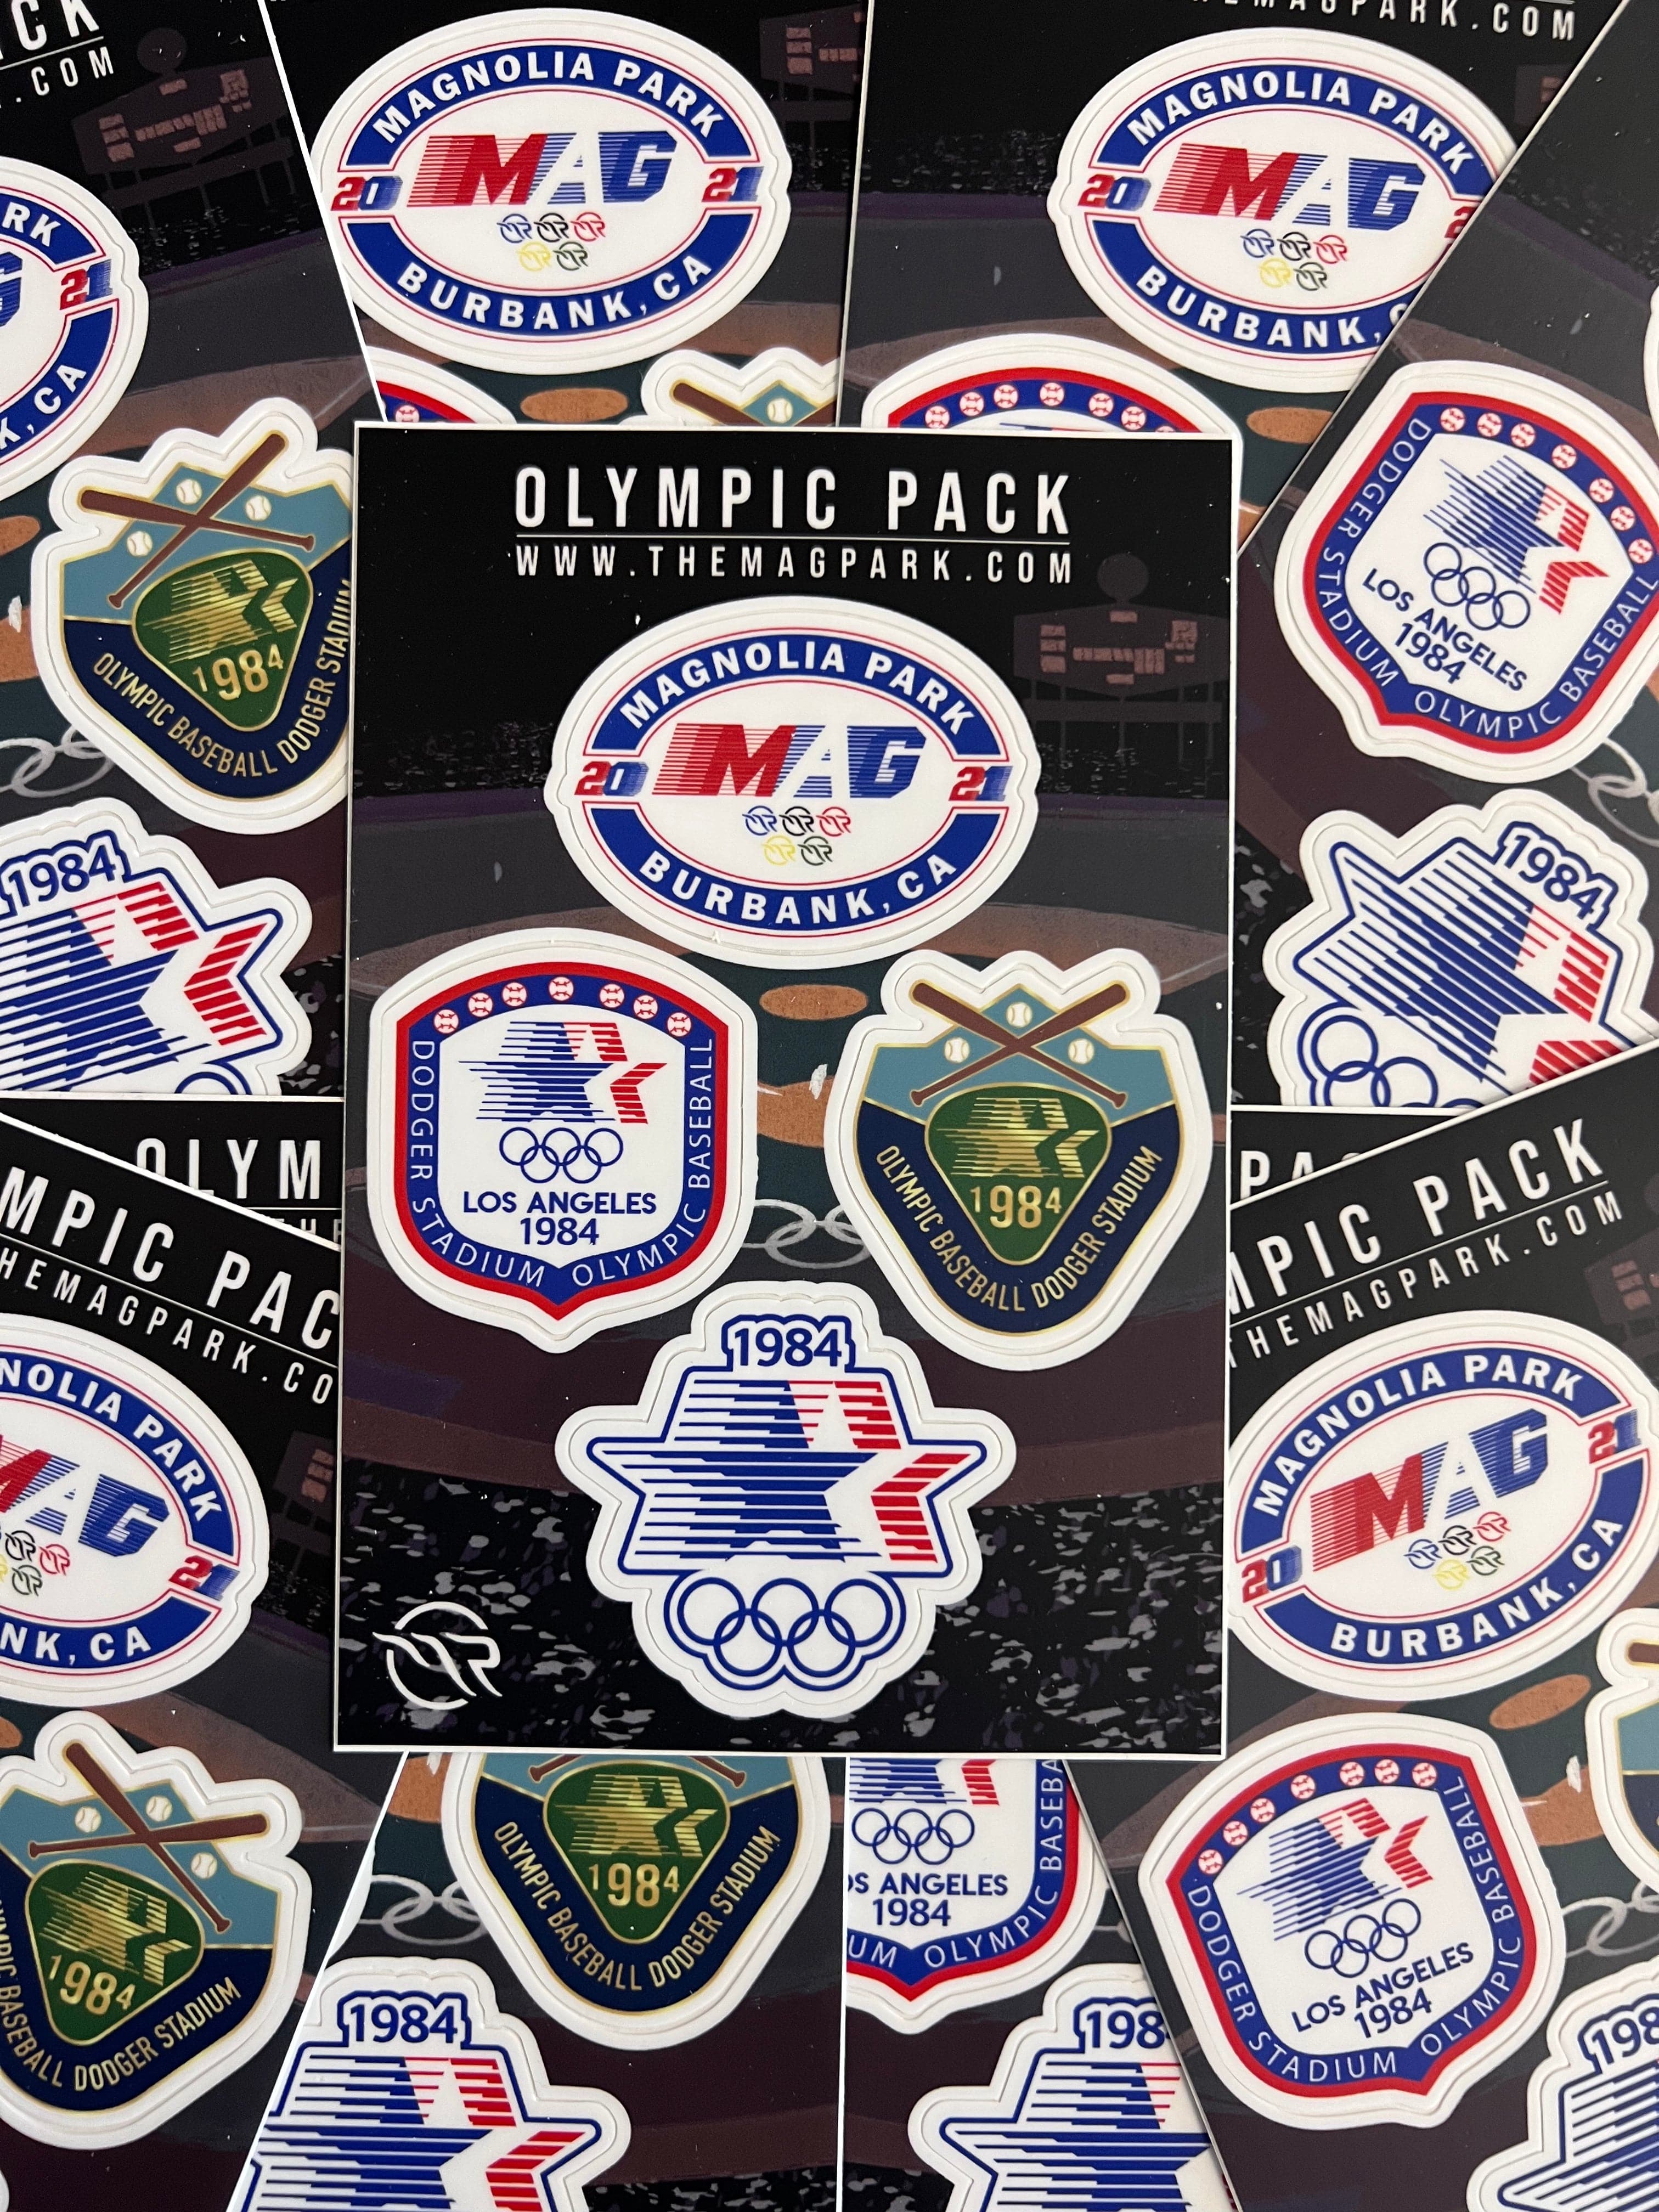 THE MAGNOLIA PARK - OLYMPIC STICKER PACK